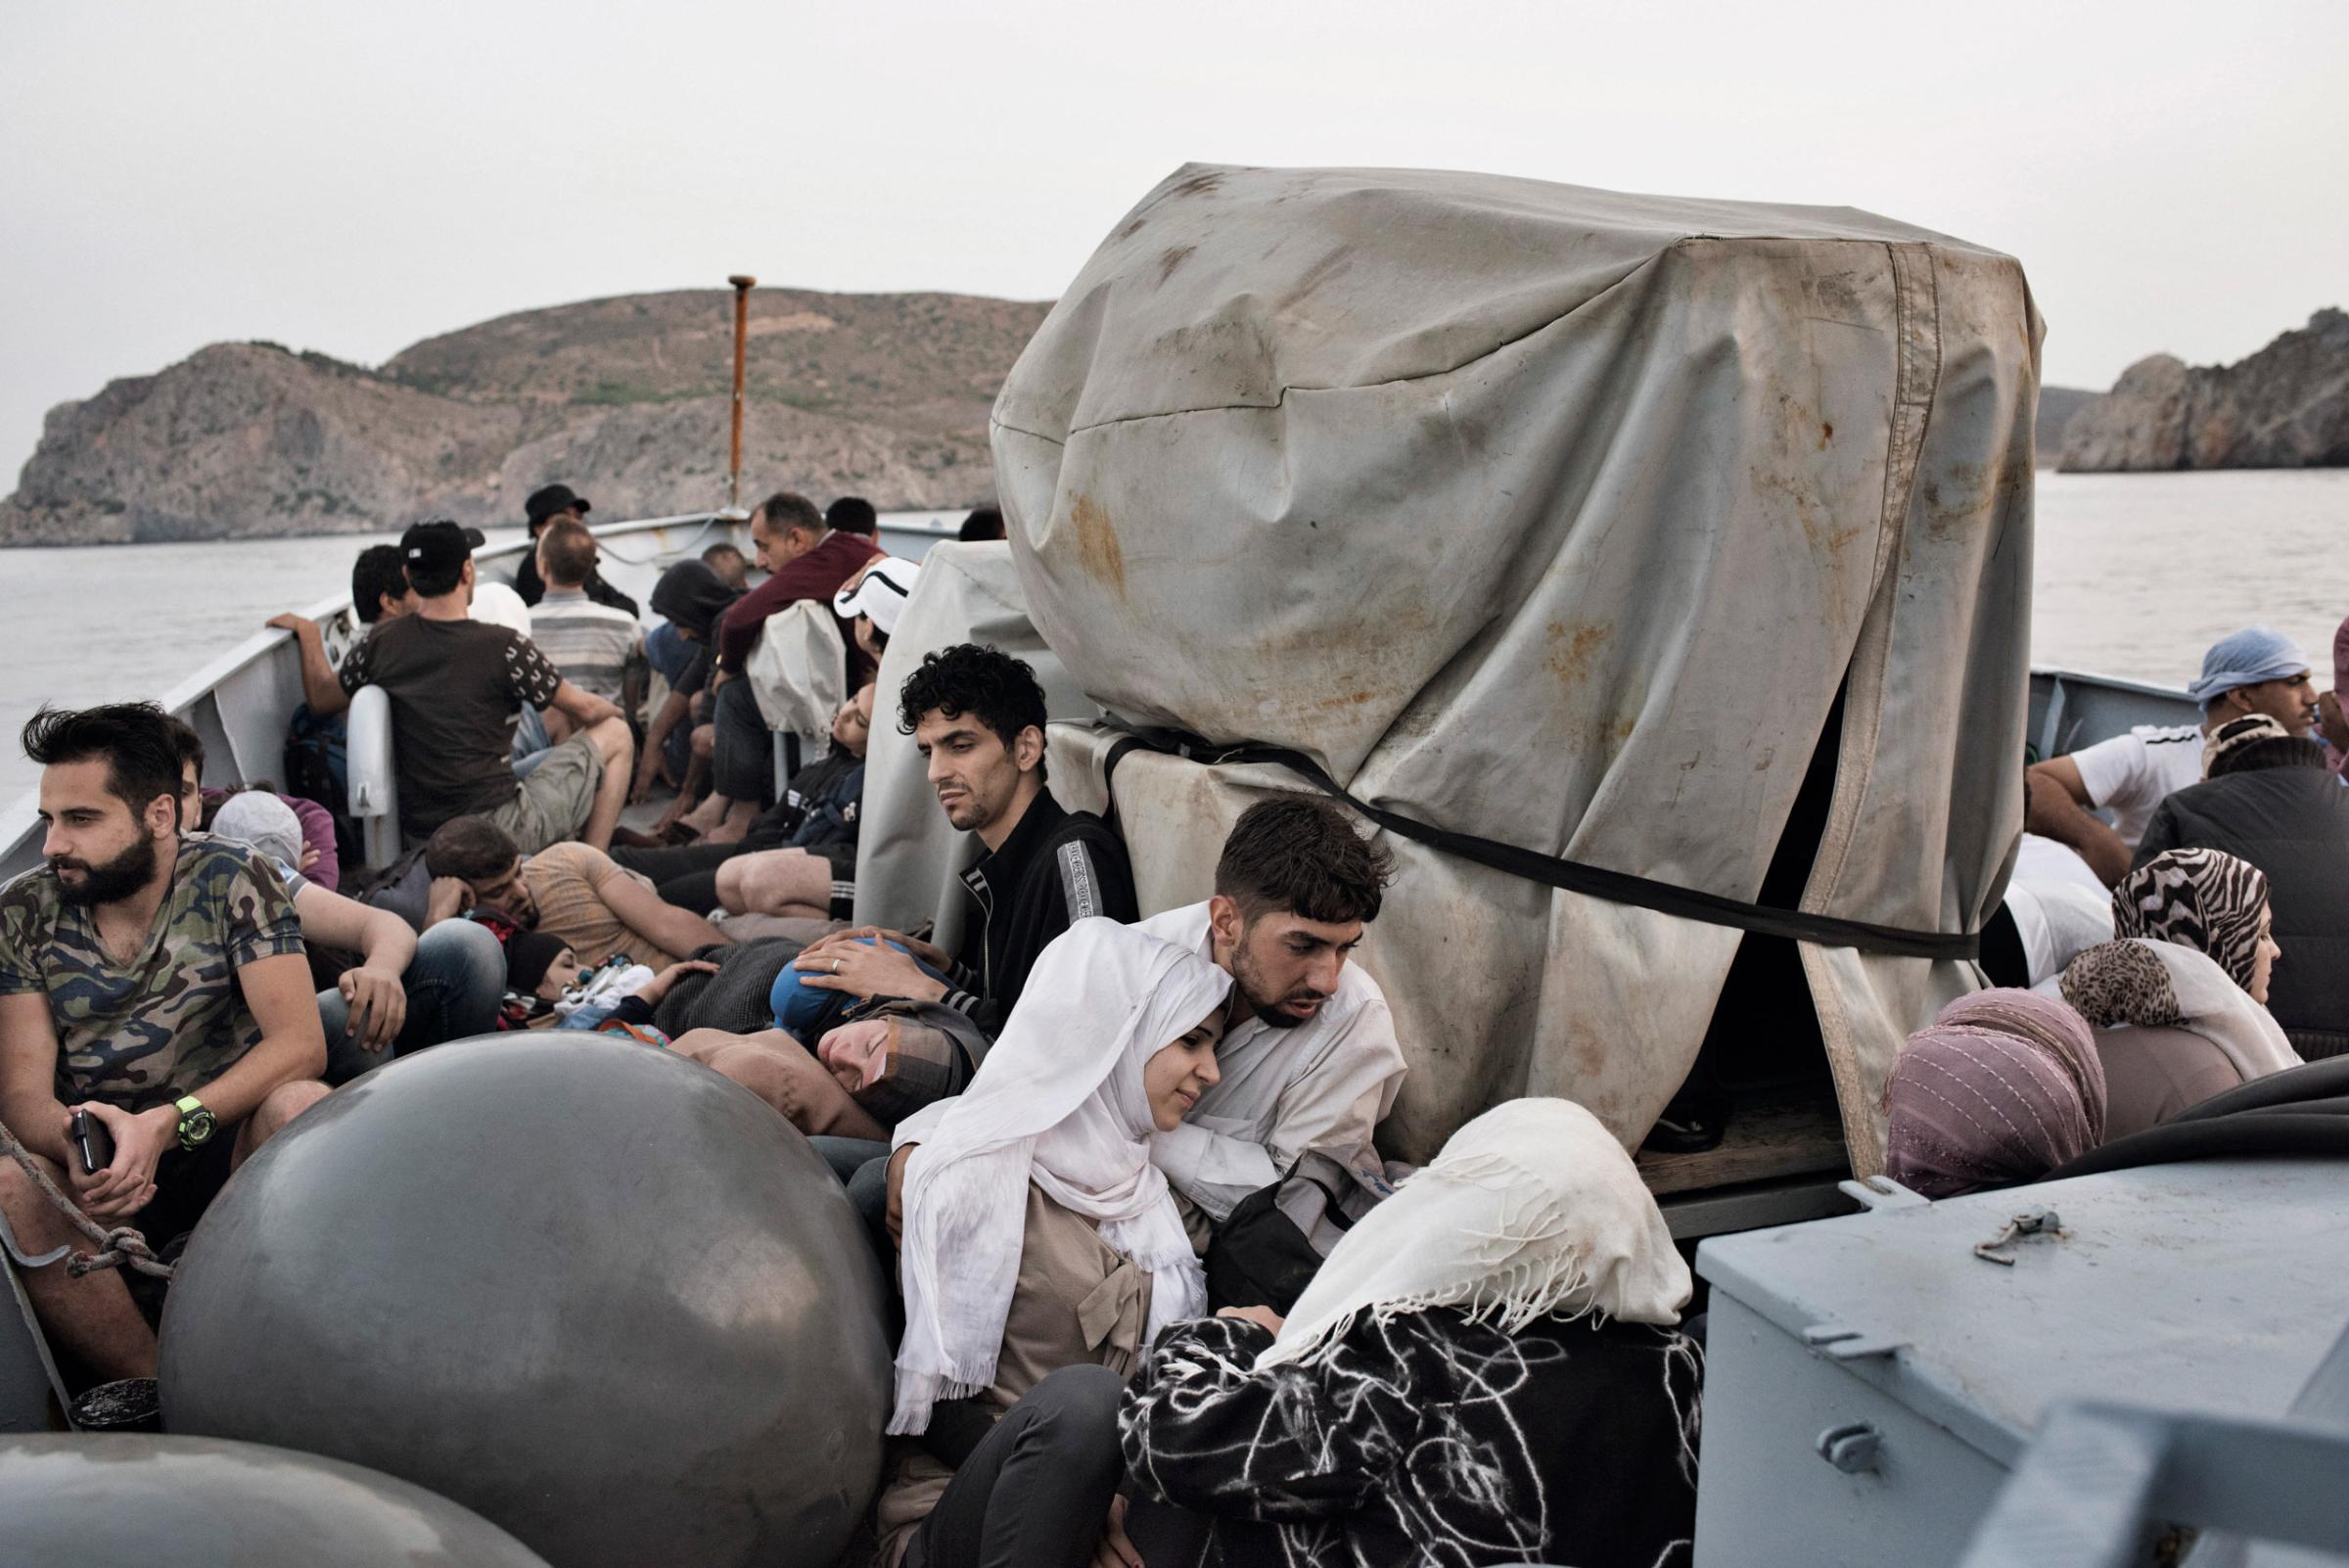 Syrian migrants are taken to Greece aboard a Greek coast guard vessel after it rescued them from waters near the Greek-Turkish border. Sept. 7, 2015.